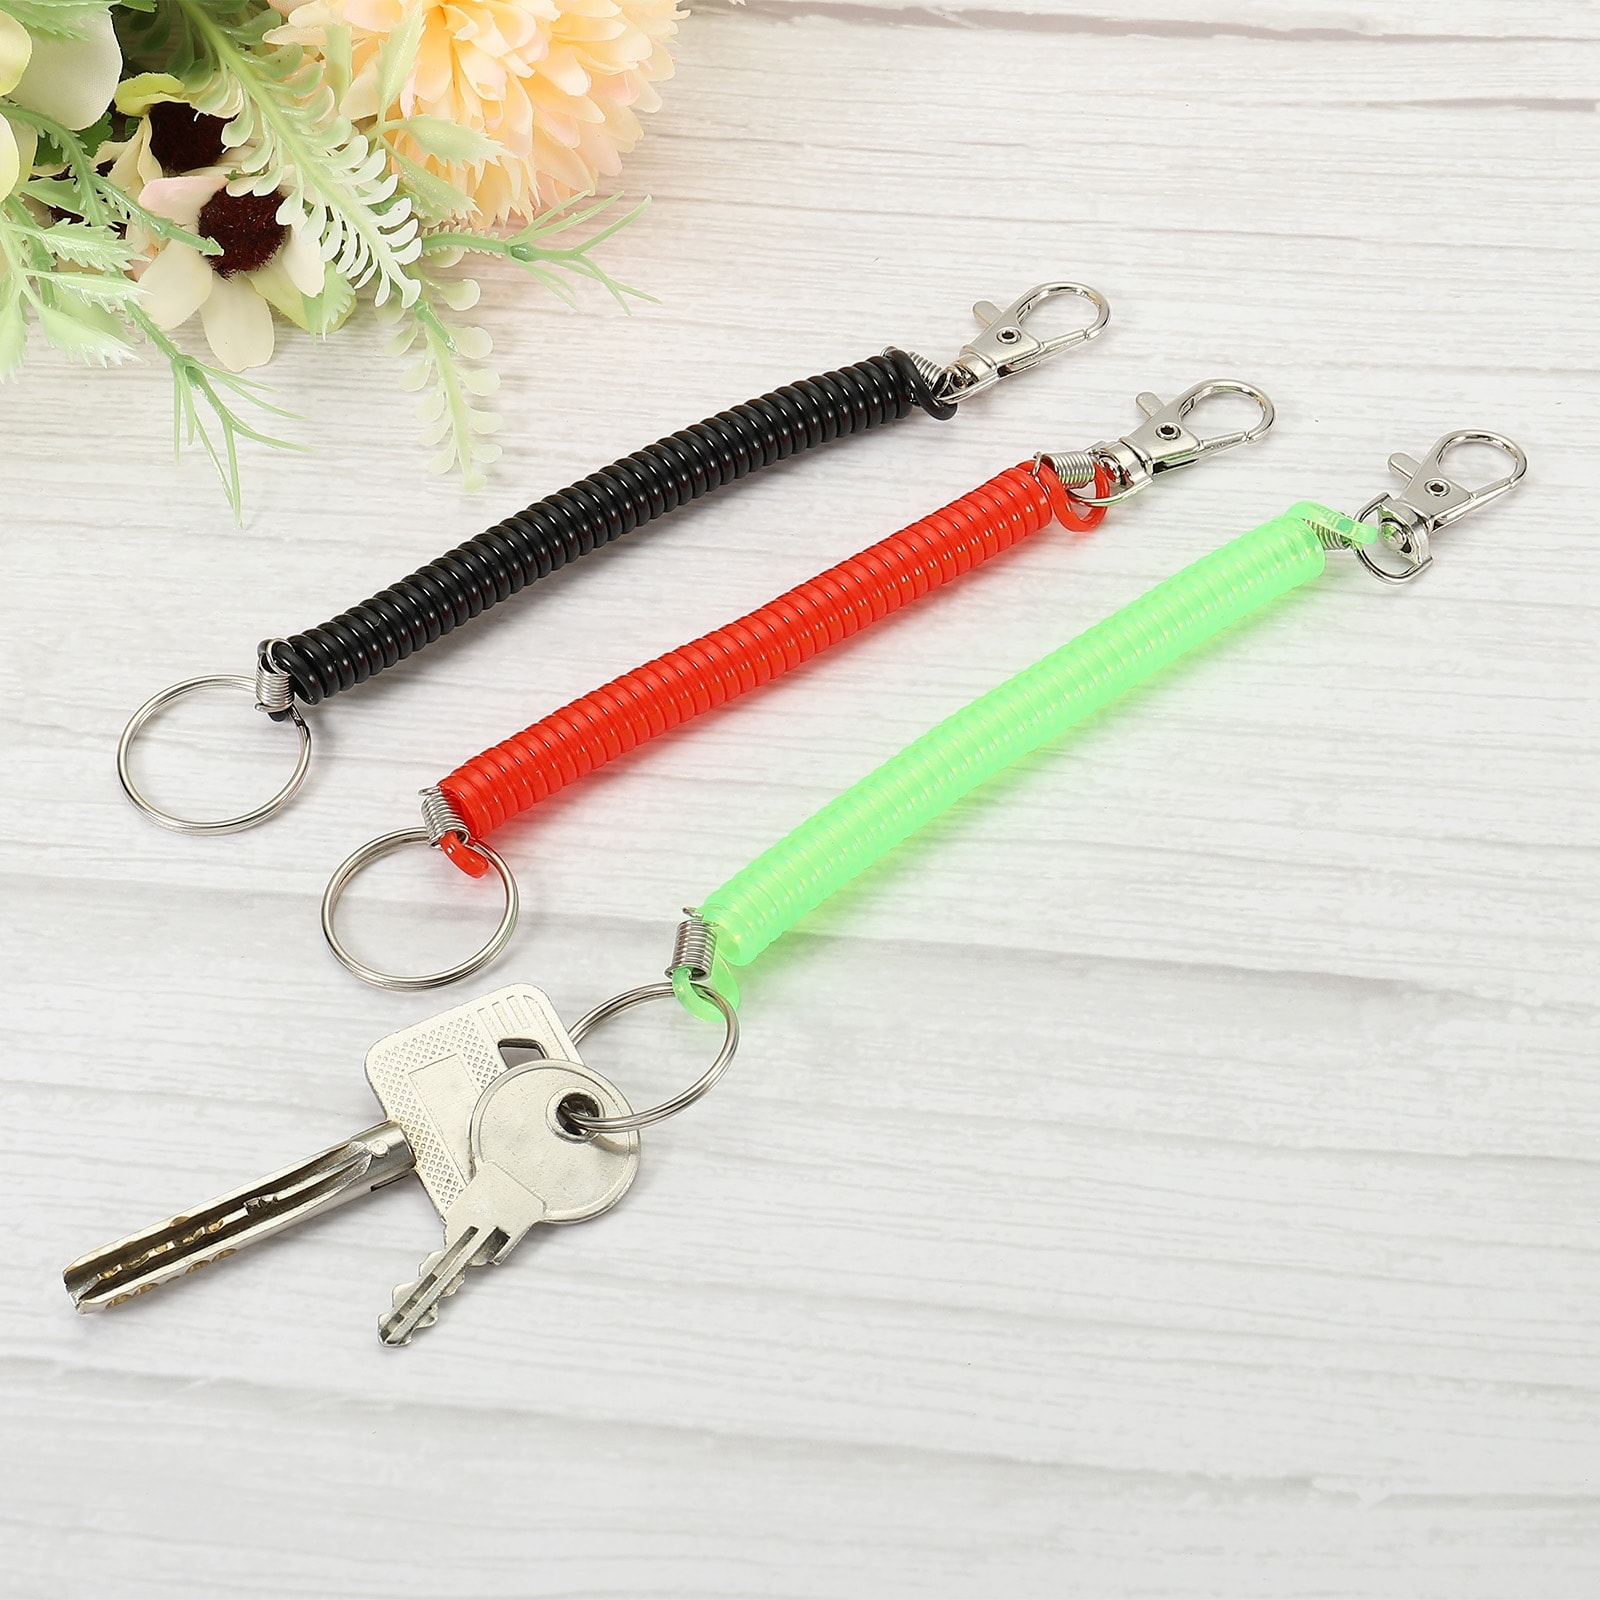 Unique Bargains 6.7 Spiral Retractable Spring Coil Keychain, 3 Pack Key Ring - Red Green Black - 17cm